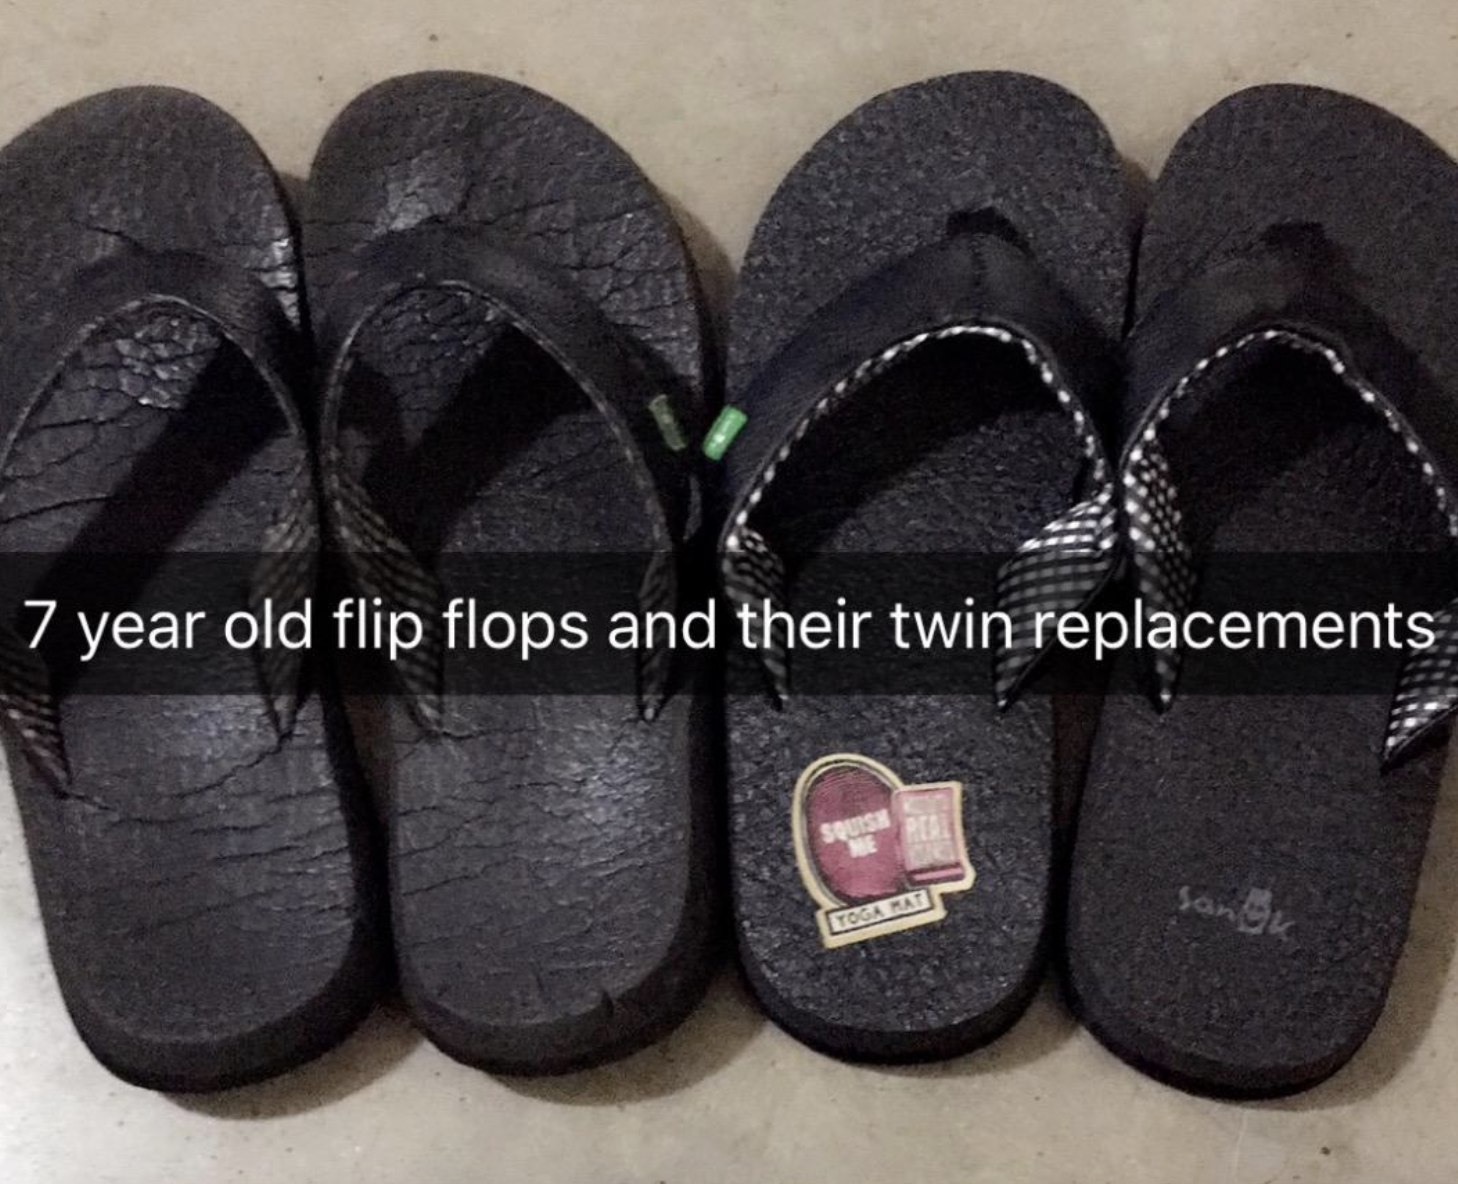 two pairs of black flip flops side-by-side labeled 